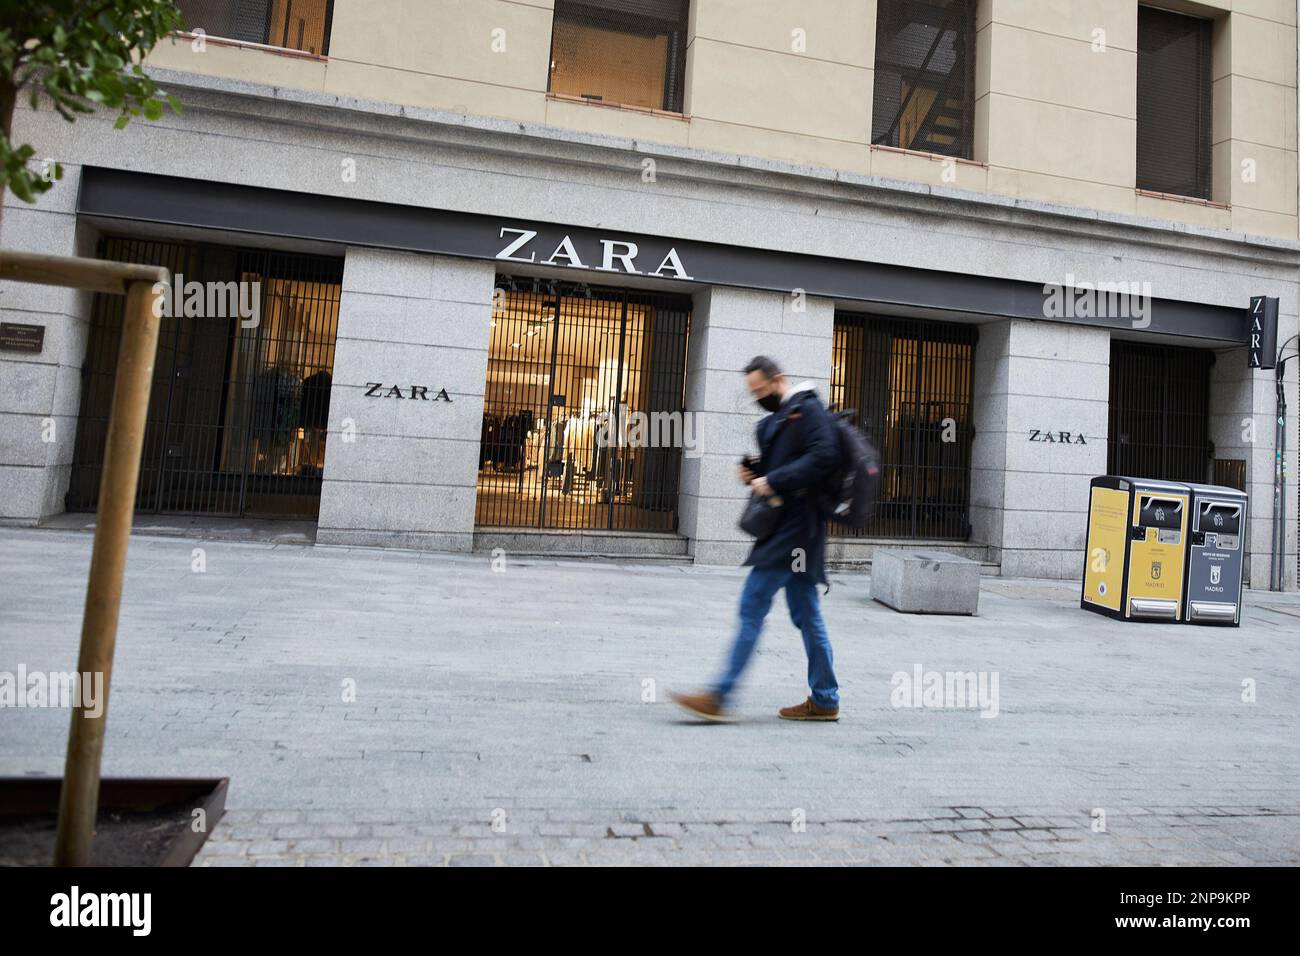 A person passes by the first Zara store that opened in the capital next to  Puerta del Sol, in Madrid, (Spain), on November 14, 2020. The store, which  belongs to the multinational